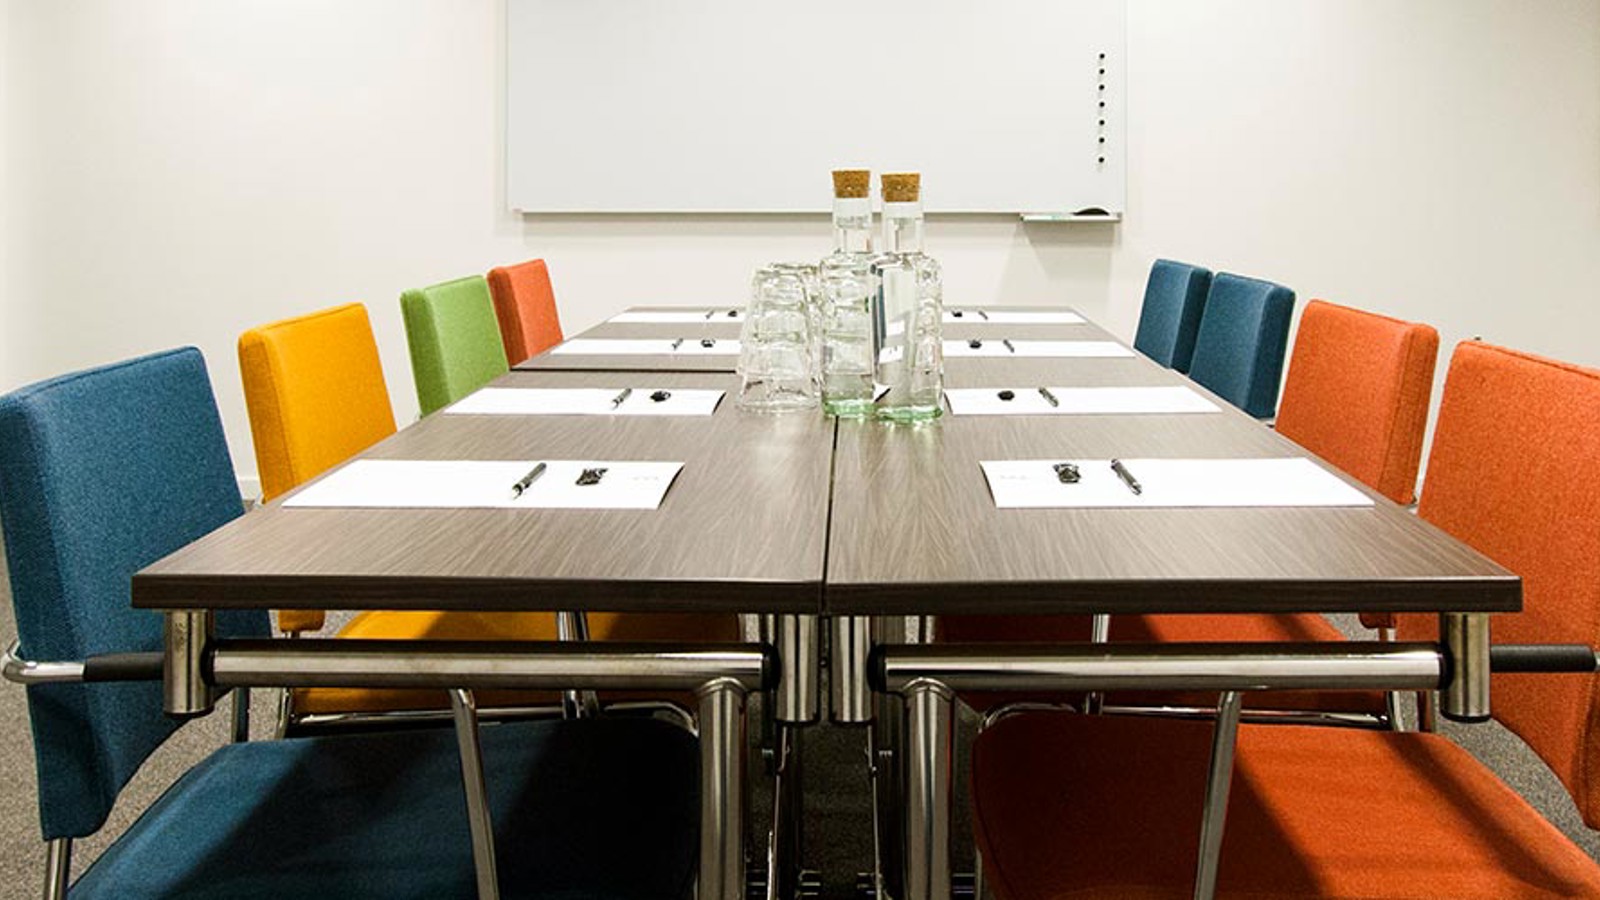 Conference Room with colorful chairs